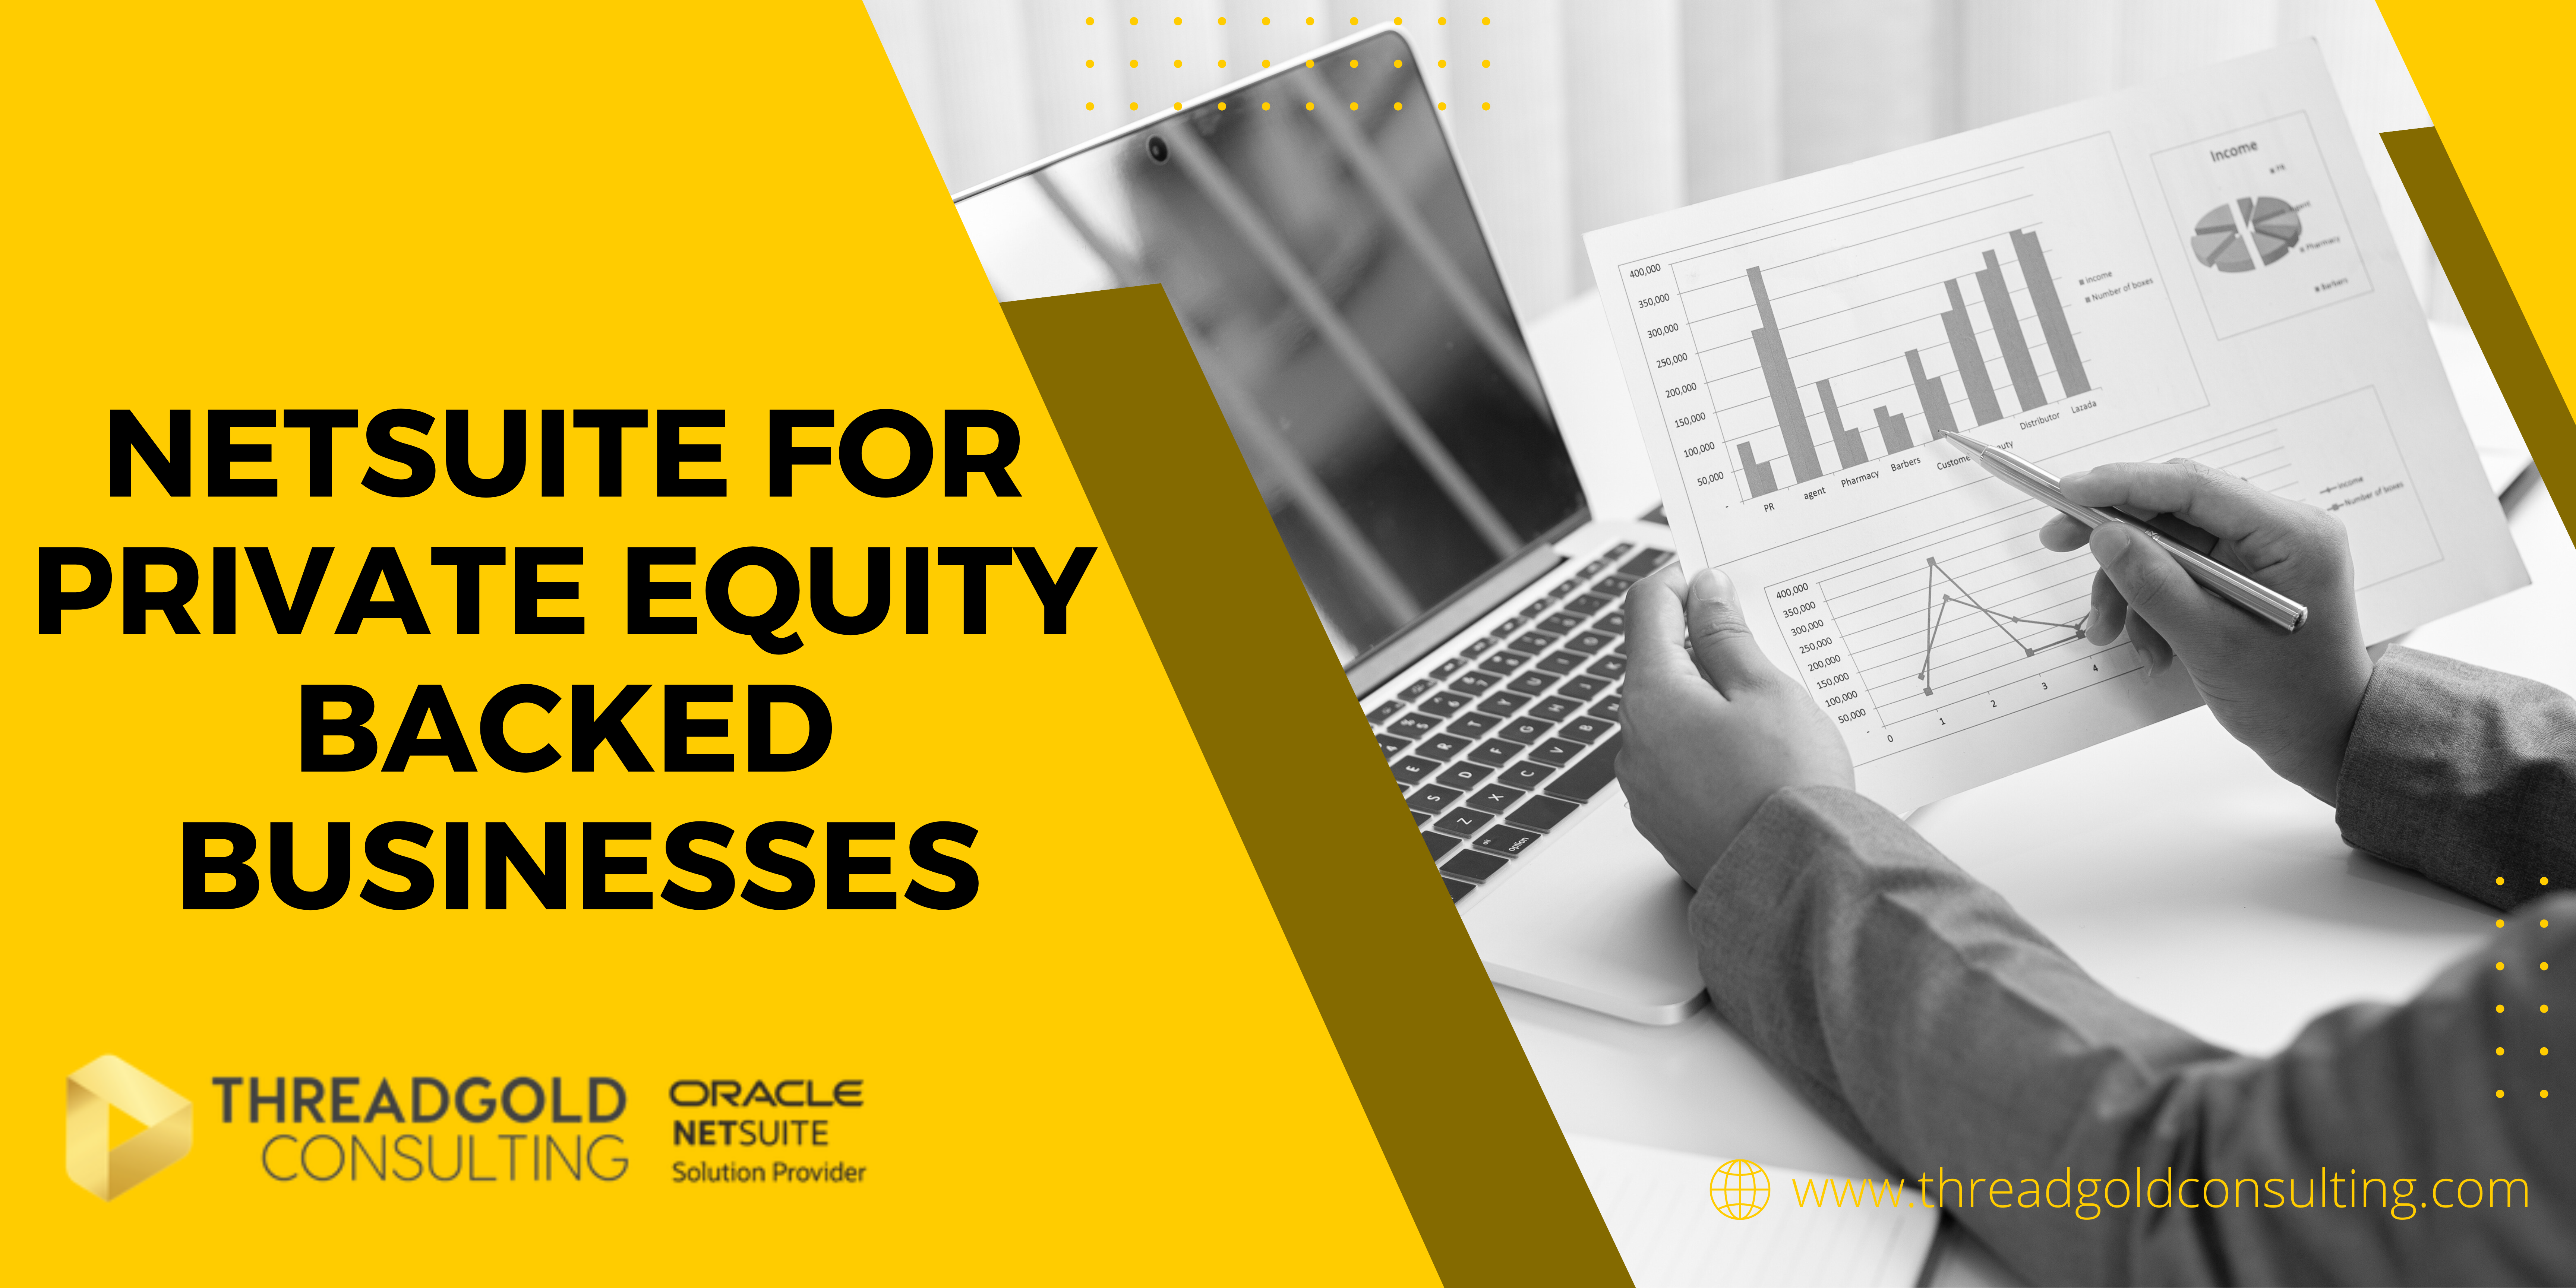 NetSuite For Private Equity Backed Businesses: Features & Benefits